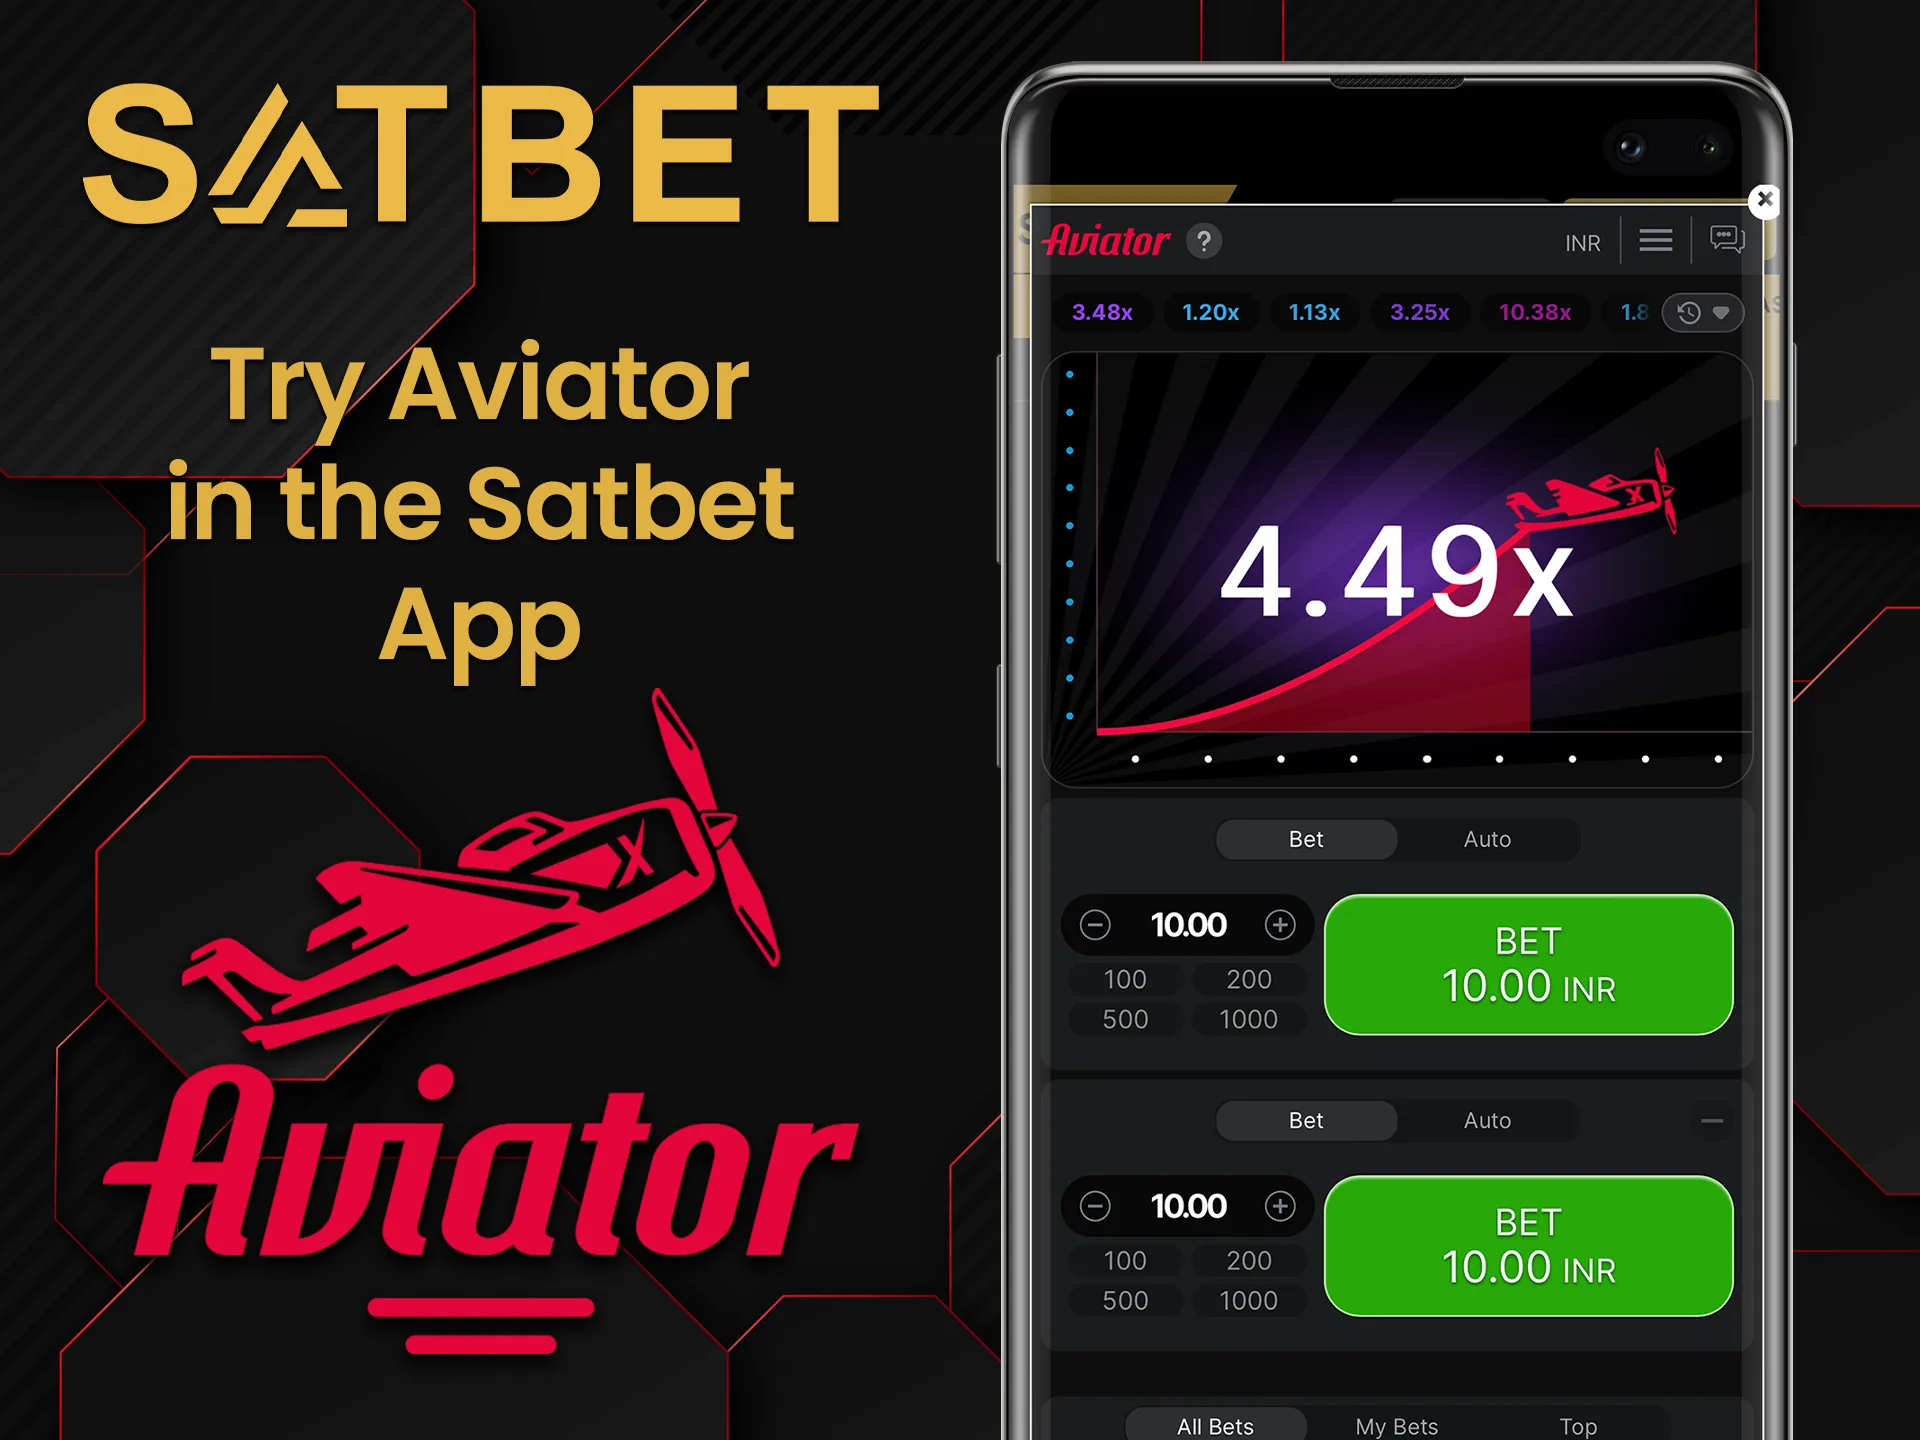 You can play Aviator from the Satbet mobile app for Android.